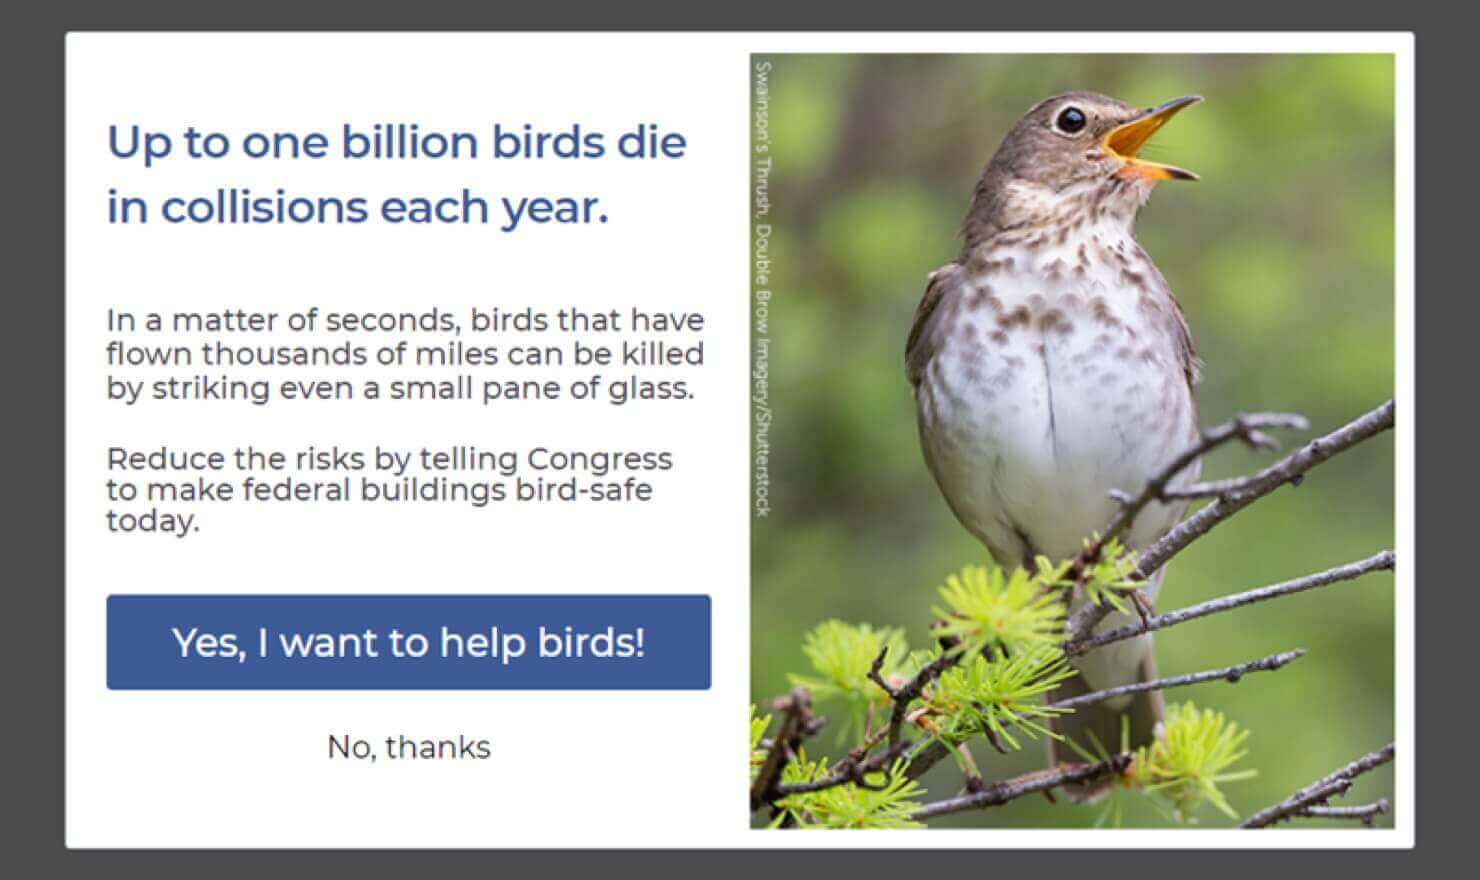 Popup with a large photo of a bird. Text says, "Up to one billion birds die in collisions each year. In a matter of seconds, birds that have flown thousands of miles can be killed by striking even a small pane of glass. Reduce the risks by telling Congress to make federal buildings bird-safe today." CTA button says "Yes, I want to help birds!" Linked text below says "No, thanks"